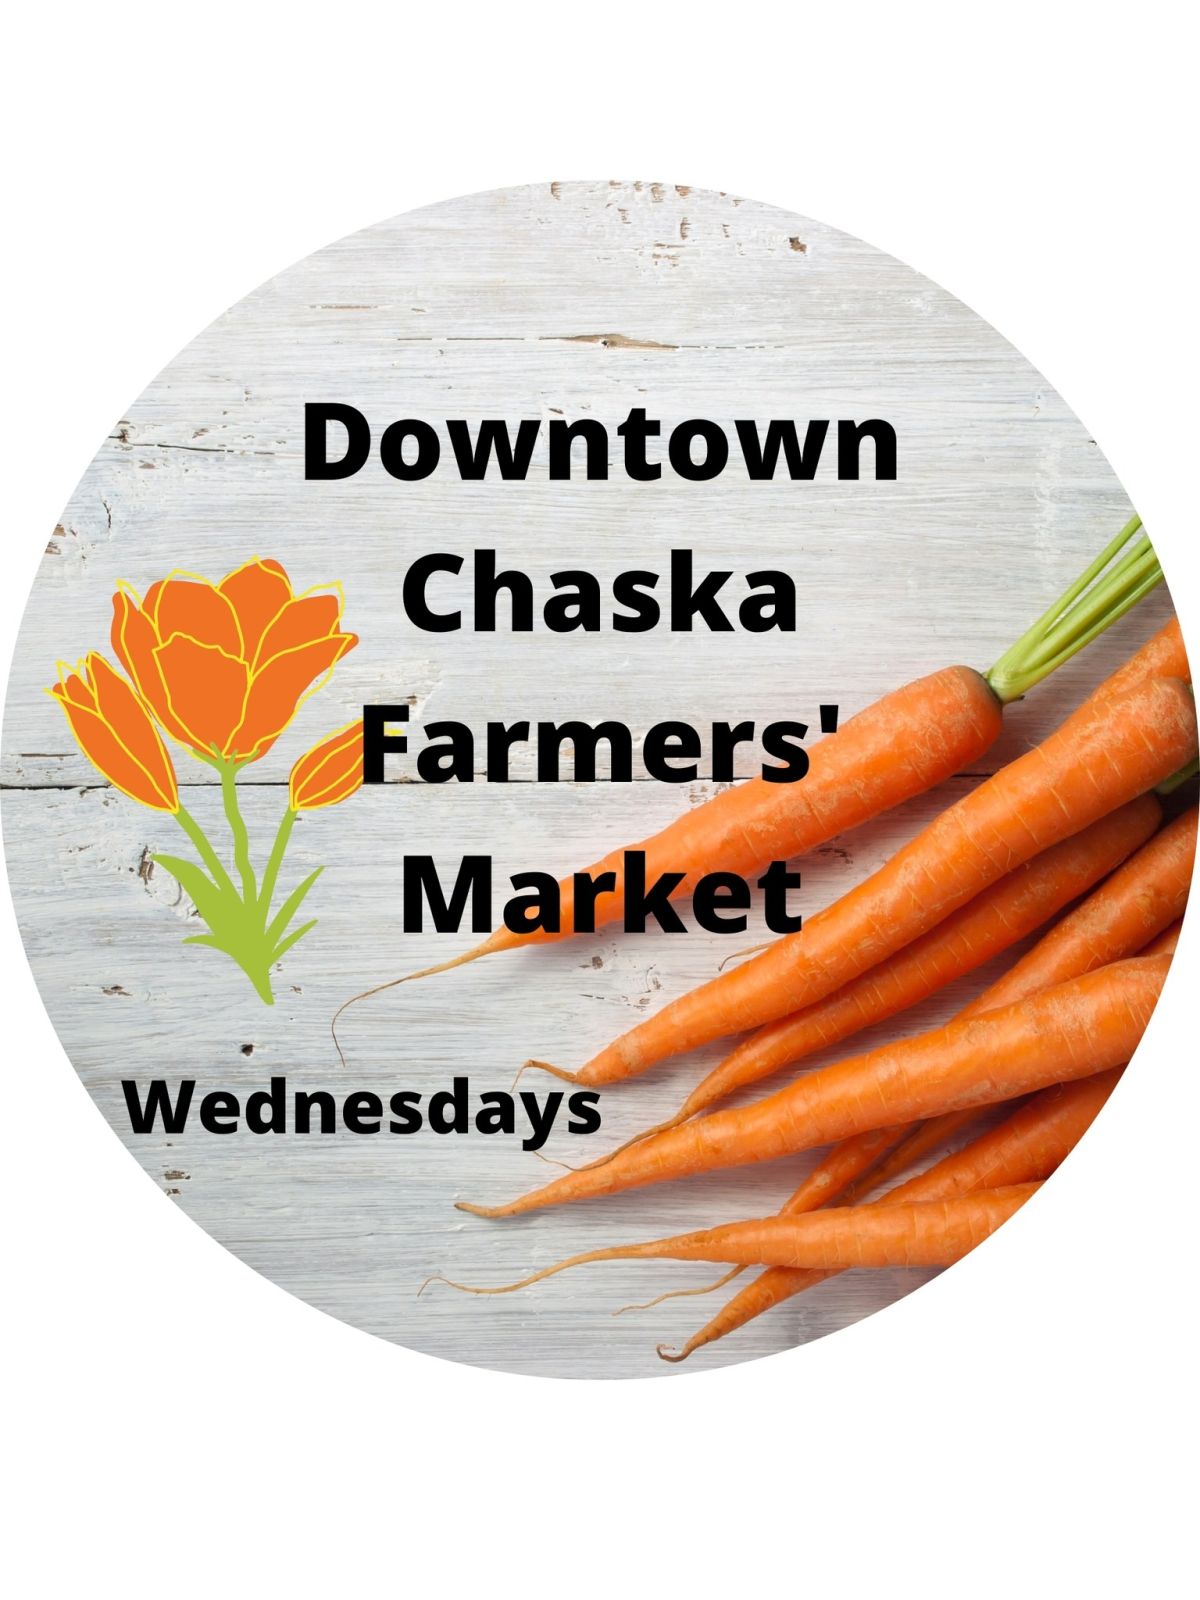 Event Promo Photo For Downtown Chaska Farmers' Market